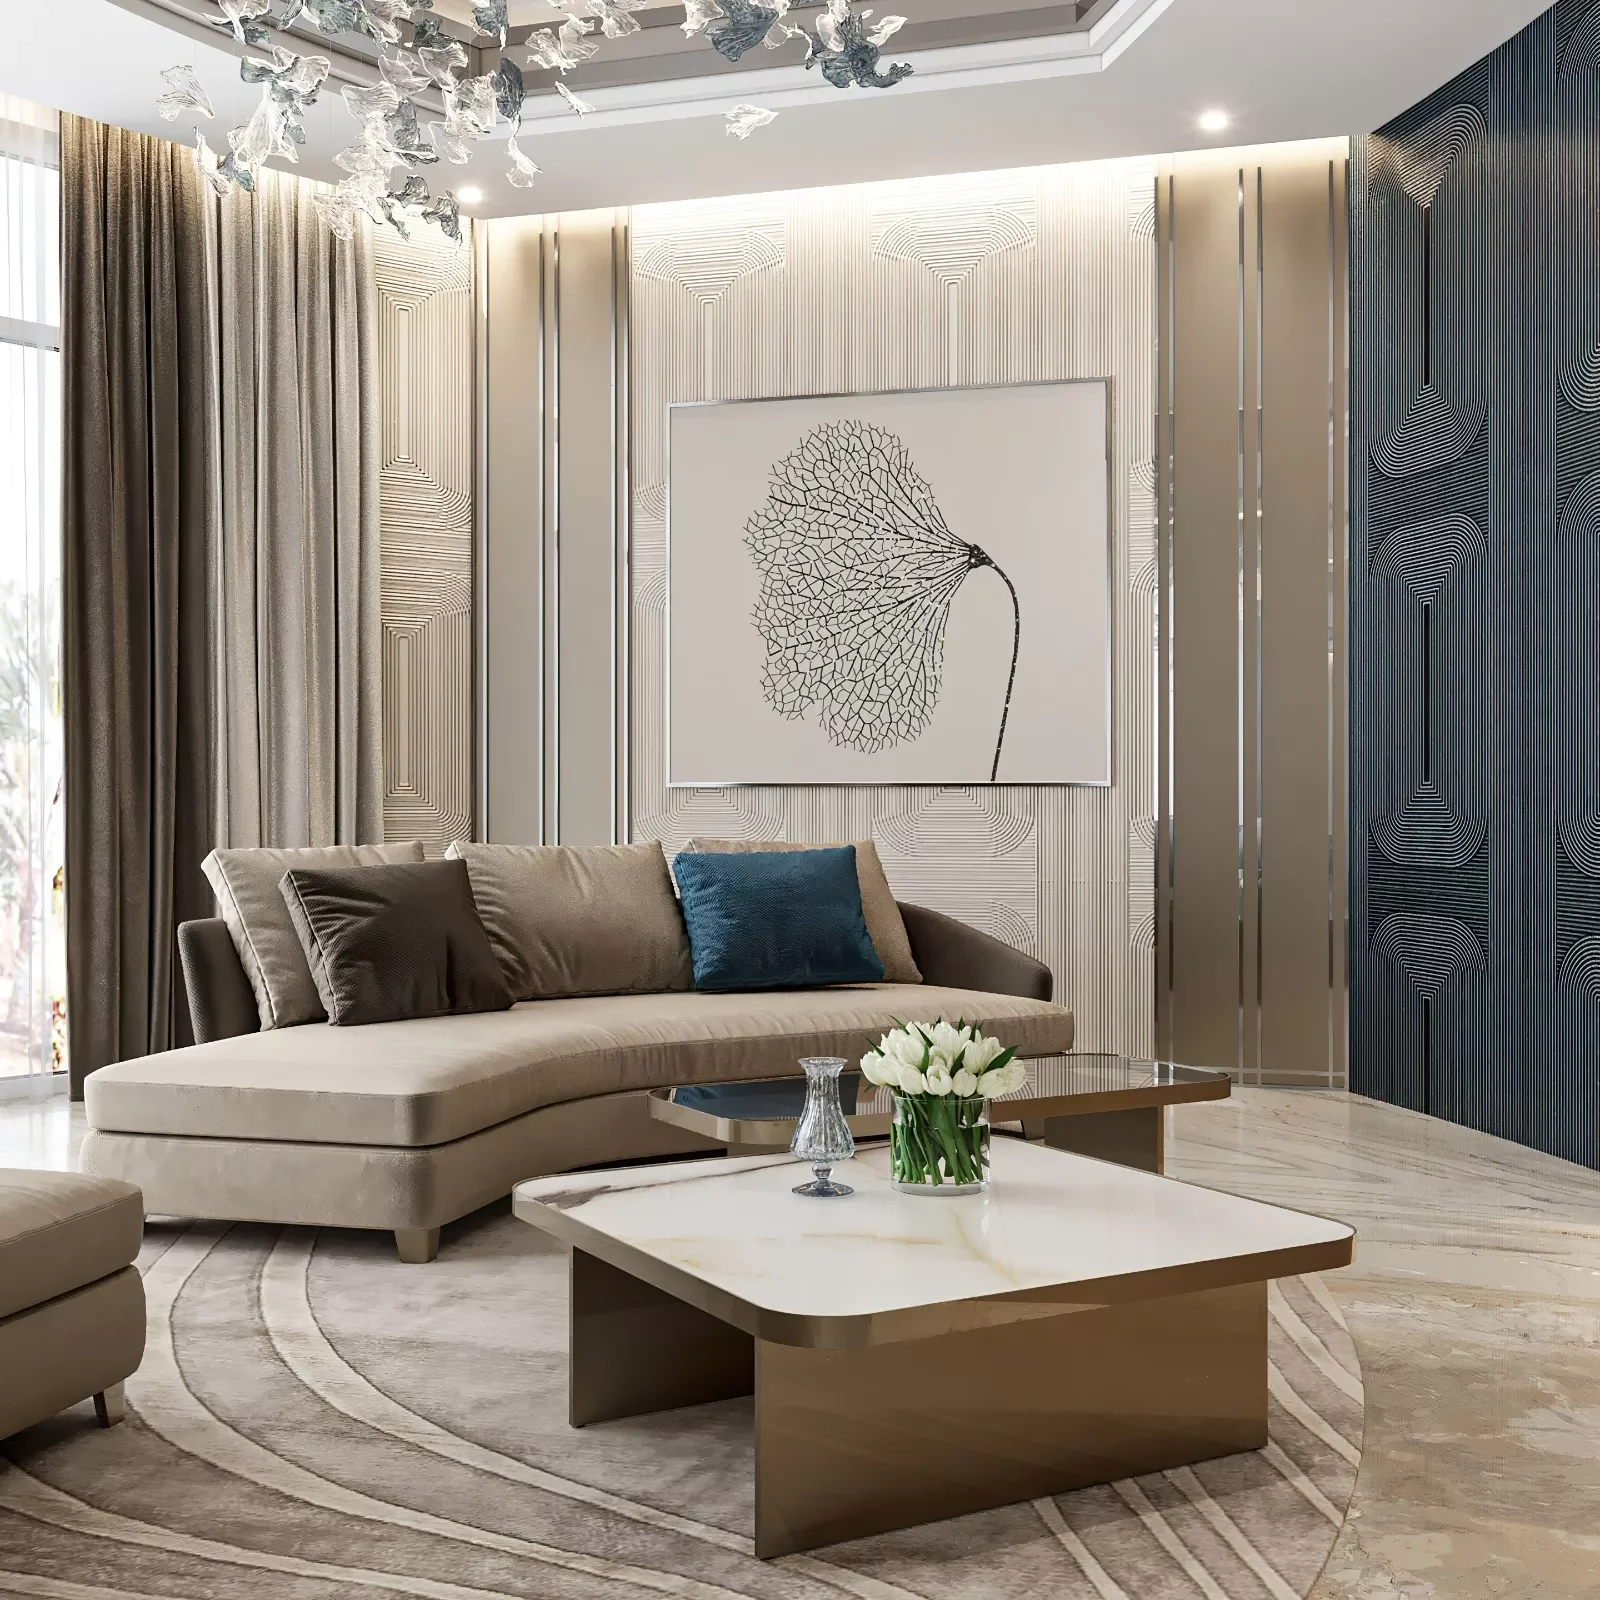 Aesthetic Opulence: A luxury Living Room Interior Design Solution